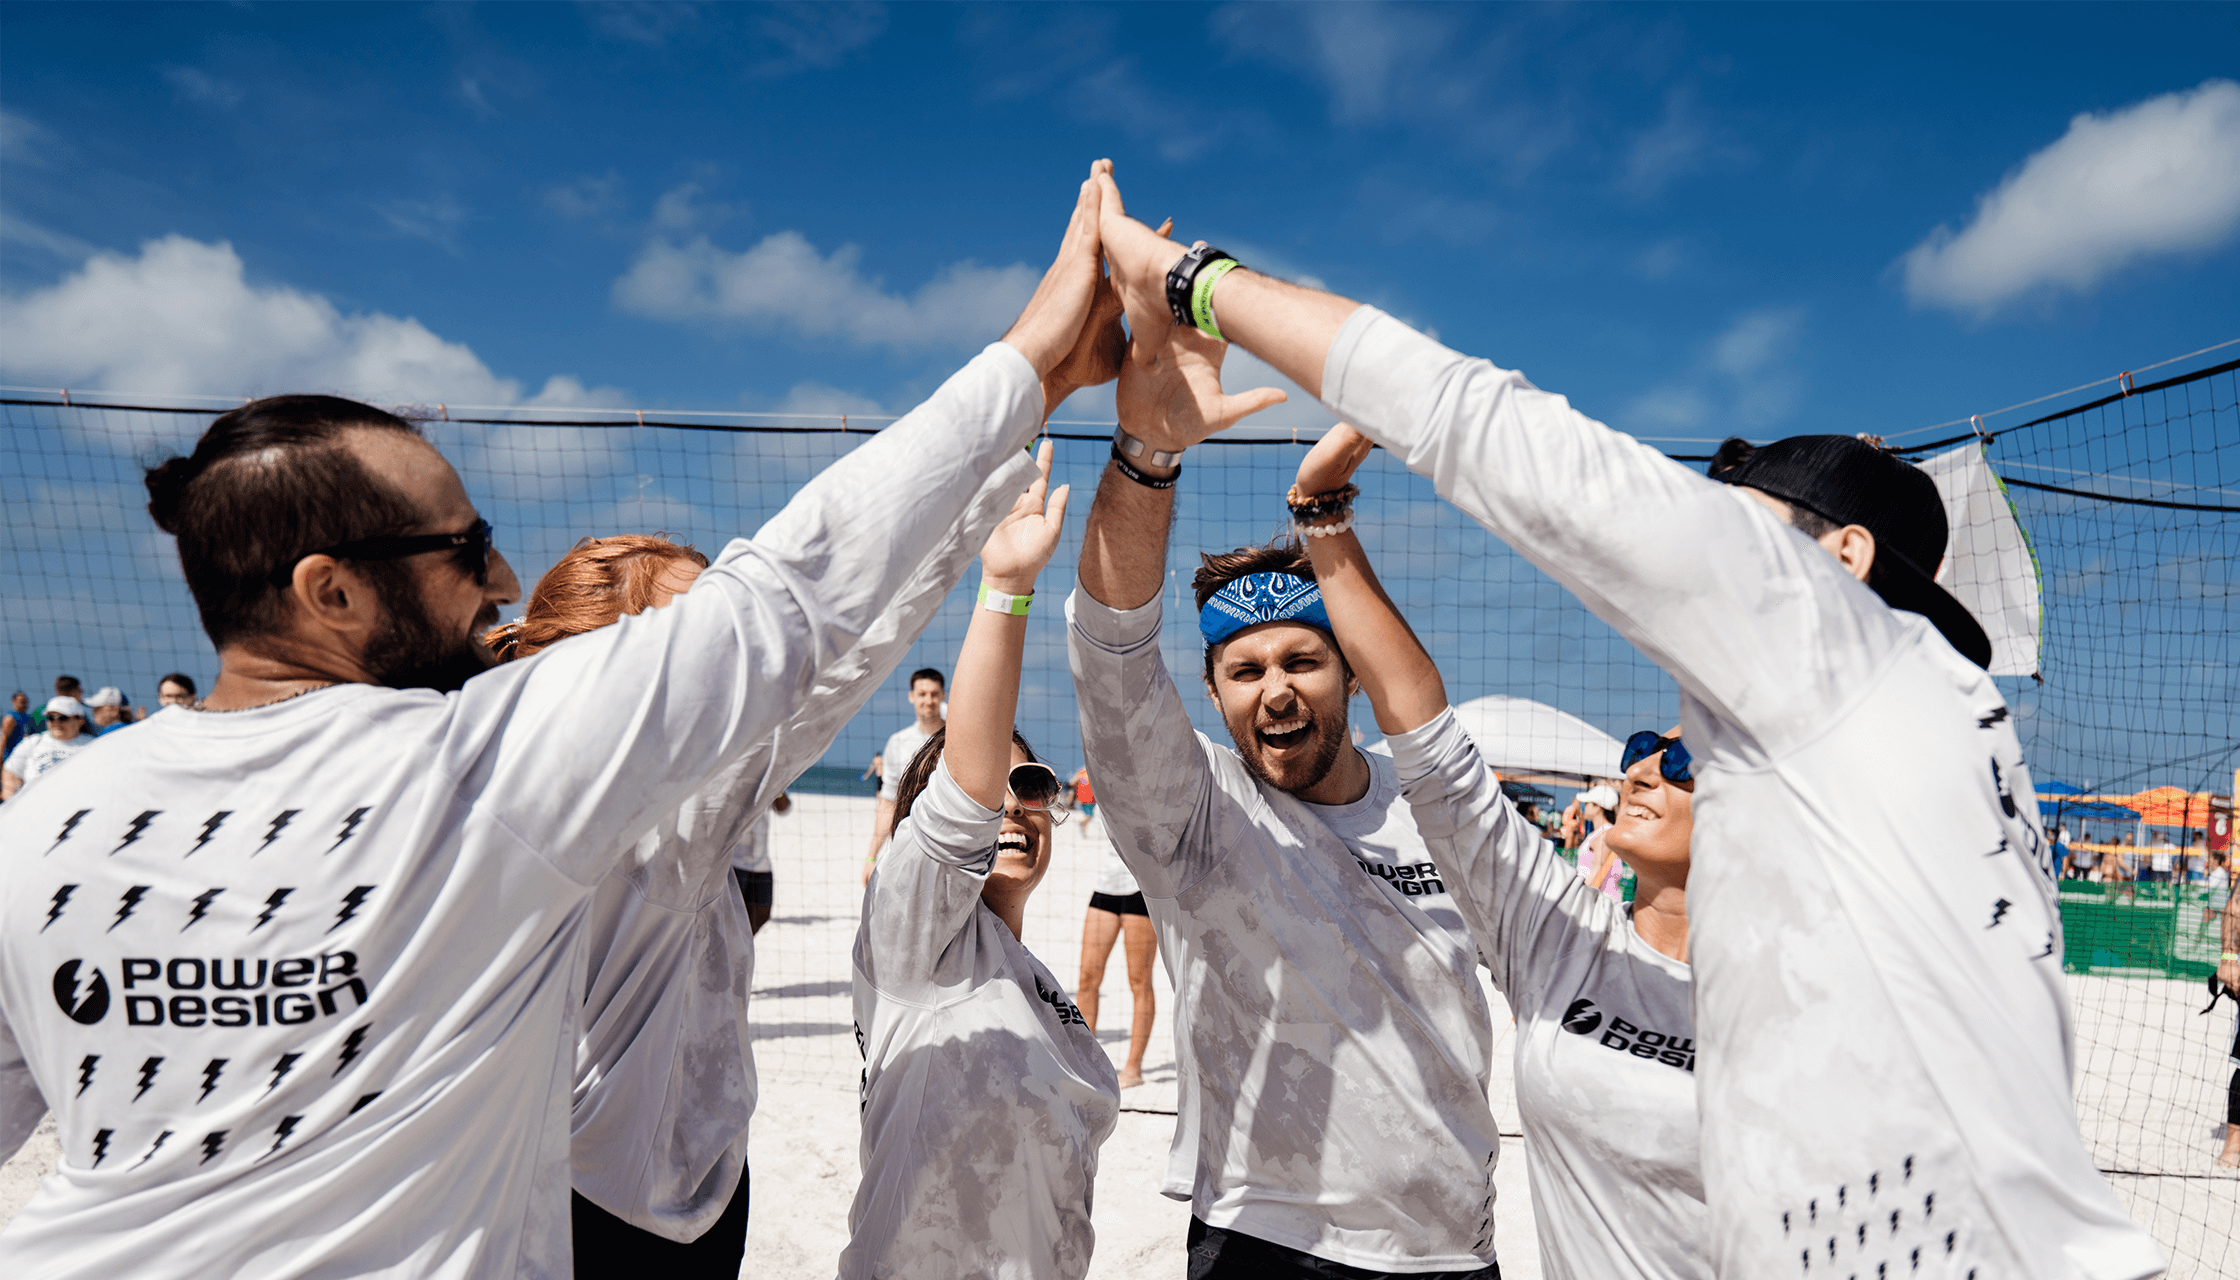 Beachside Team Building Competition? Count Us In!